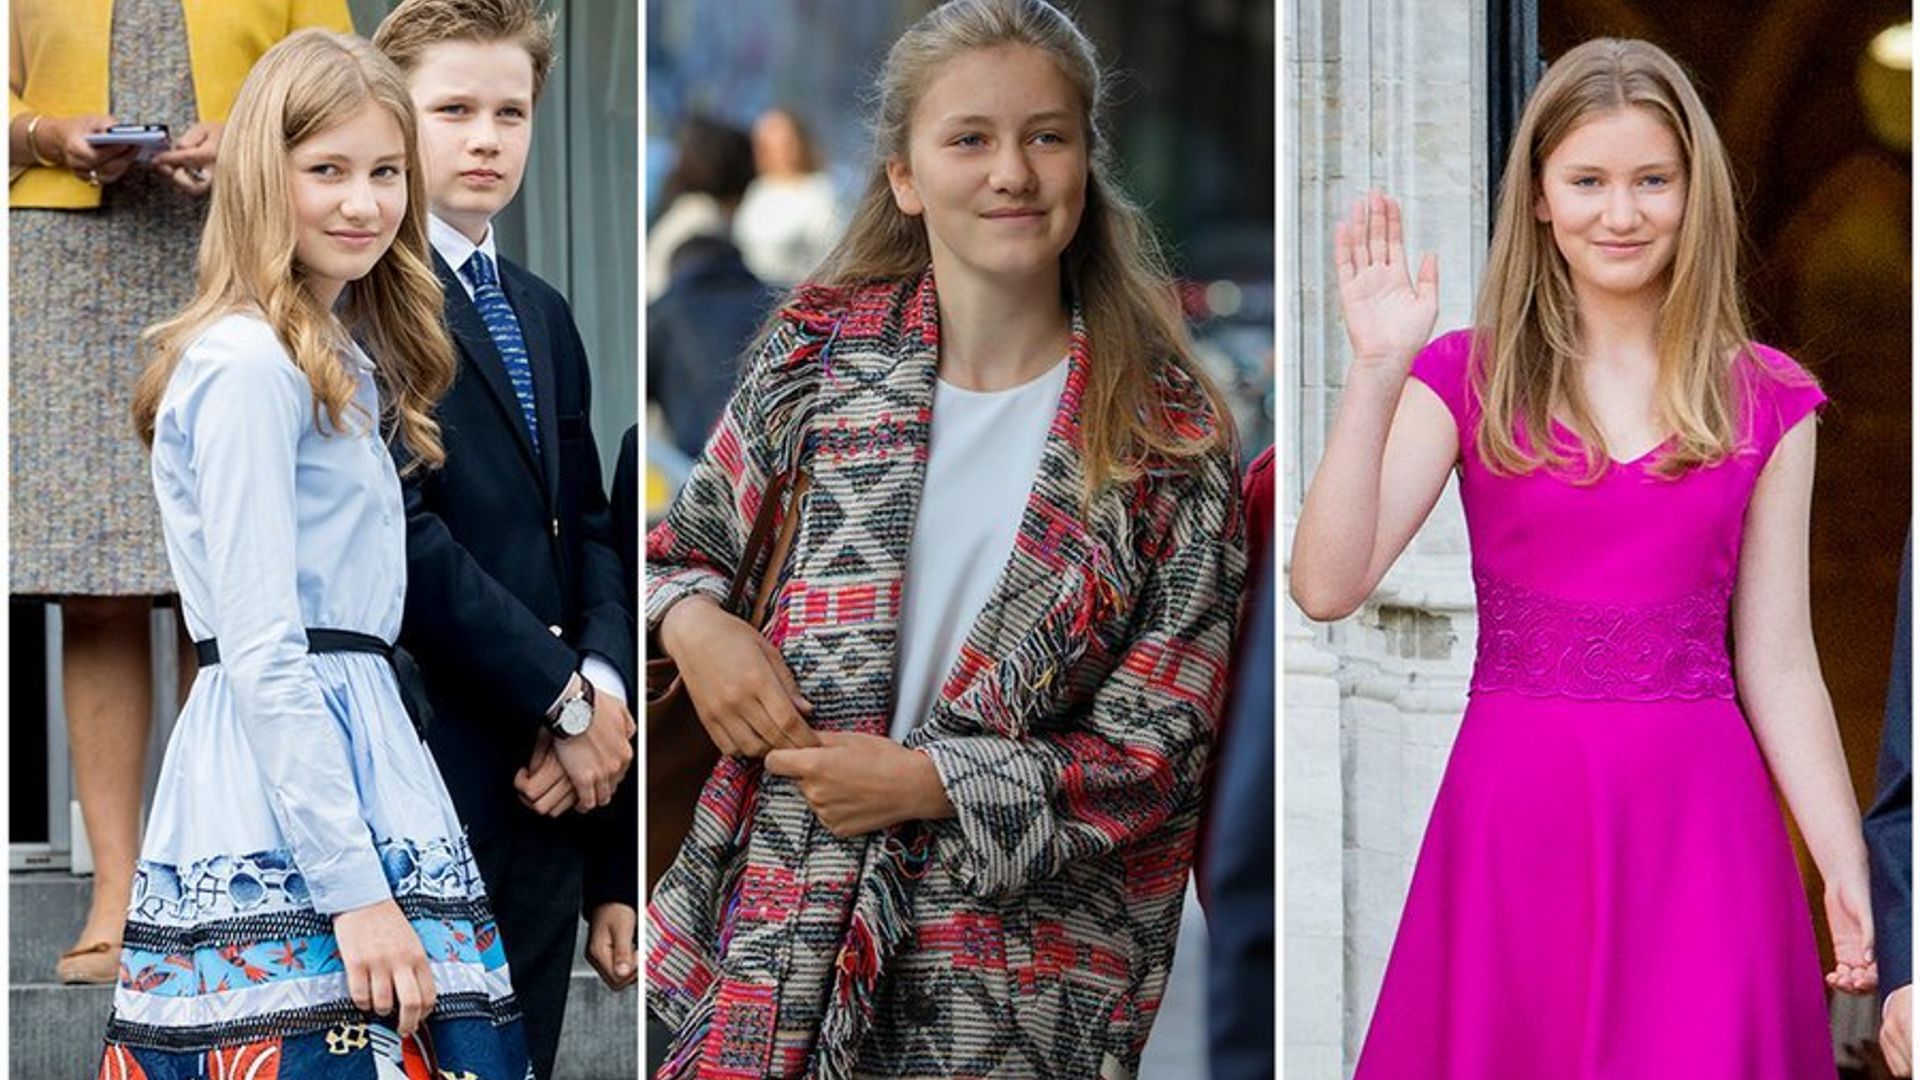 Princess Elisabeth of Belgium: Facts about the future queen